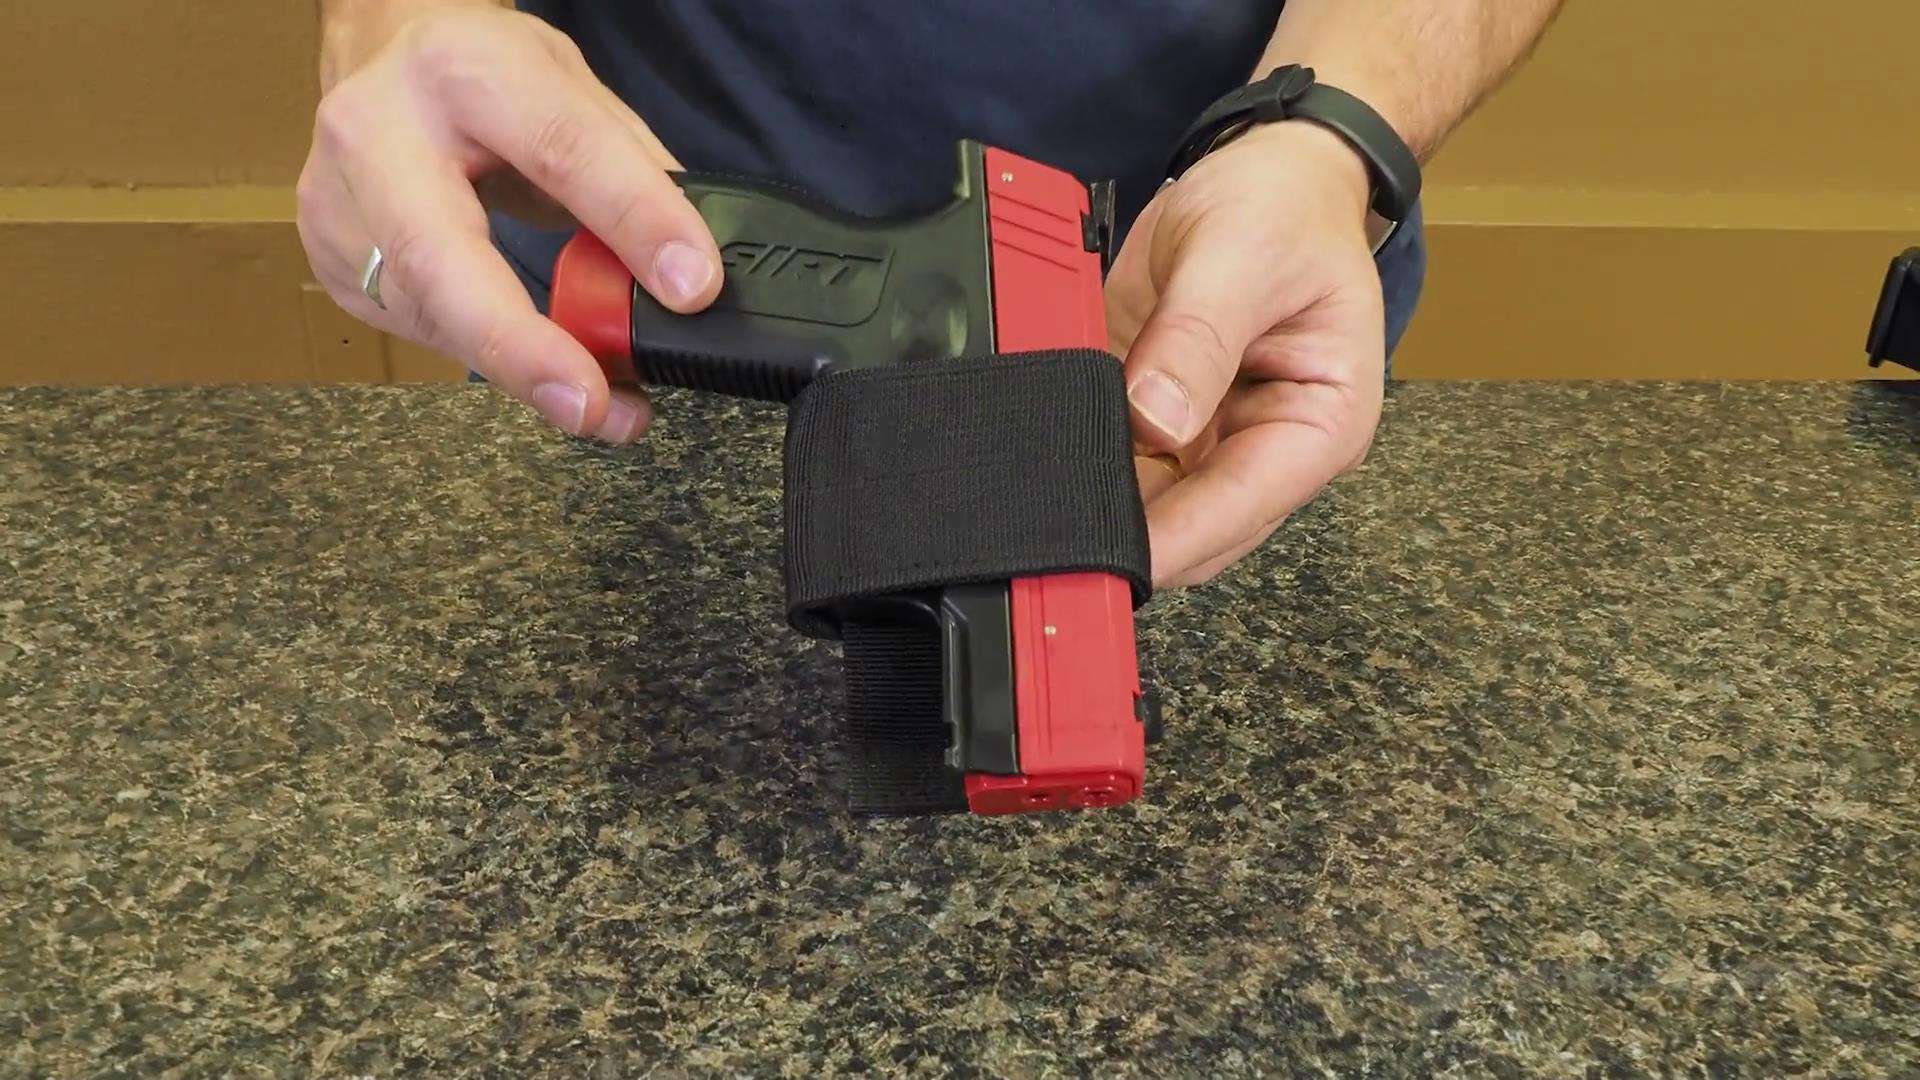 2. Key Factors to Consider When Choosing a Holster for Off-Body Carry